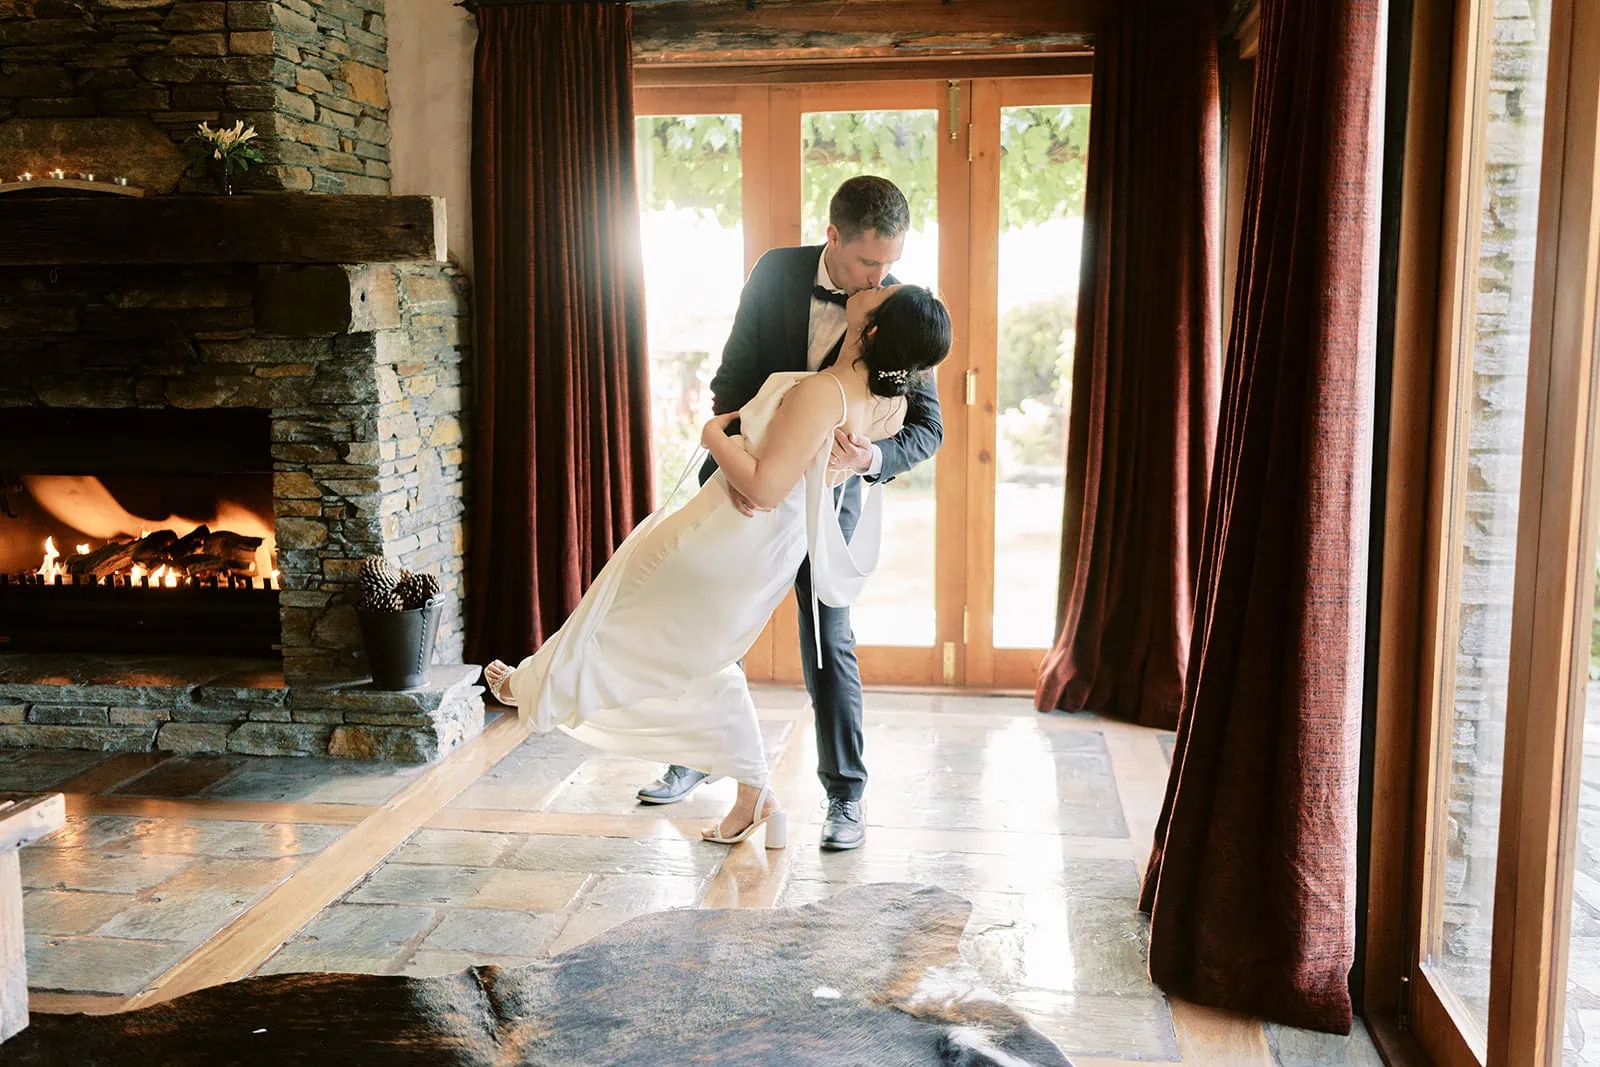 Queenstown Elopement Heli Wedding Photographer クイーンズタウン結婚式 | Mj and Shane, the bride and groom from Stoneridge Queenstown, gracefully dancing in front of a cozy fireplace.